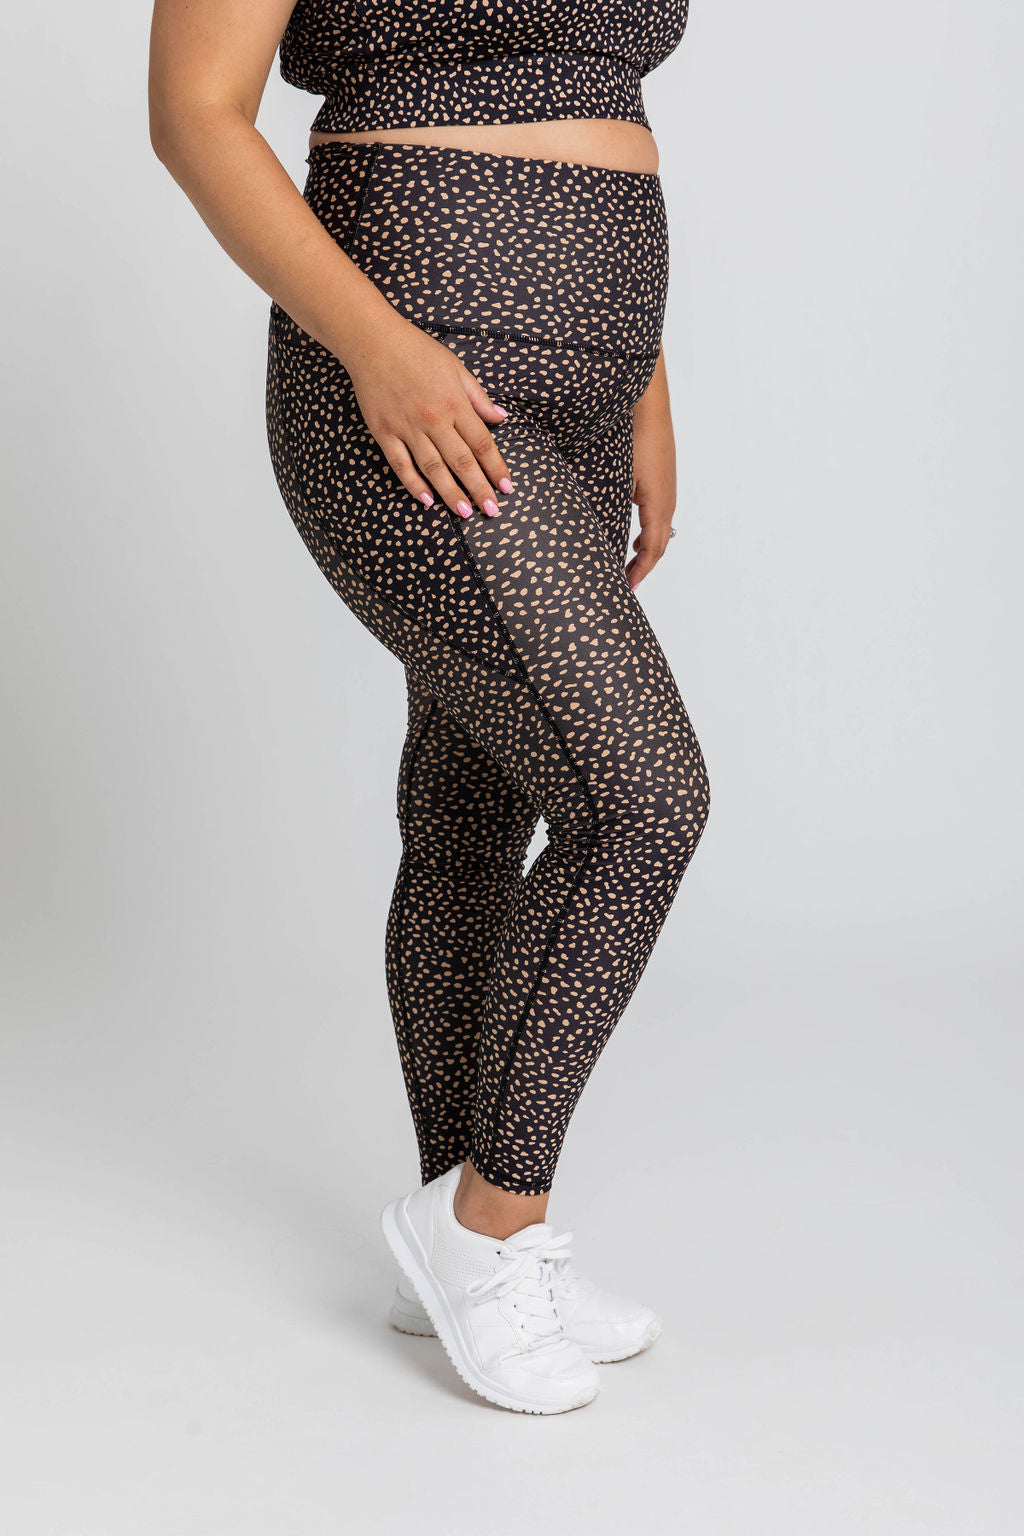 LUXE HIGH WAIST TIGHTS - SPOTTY